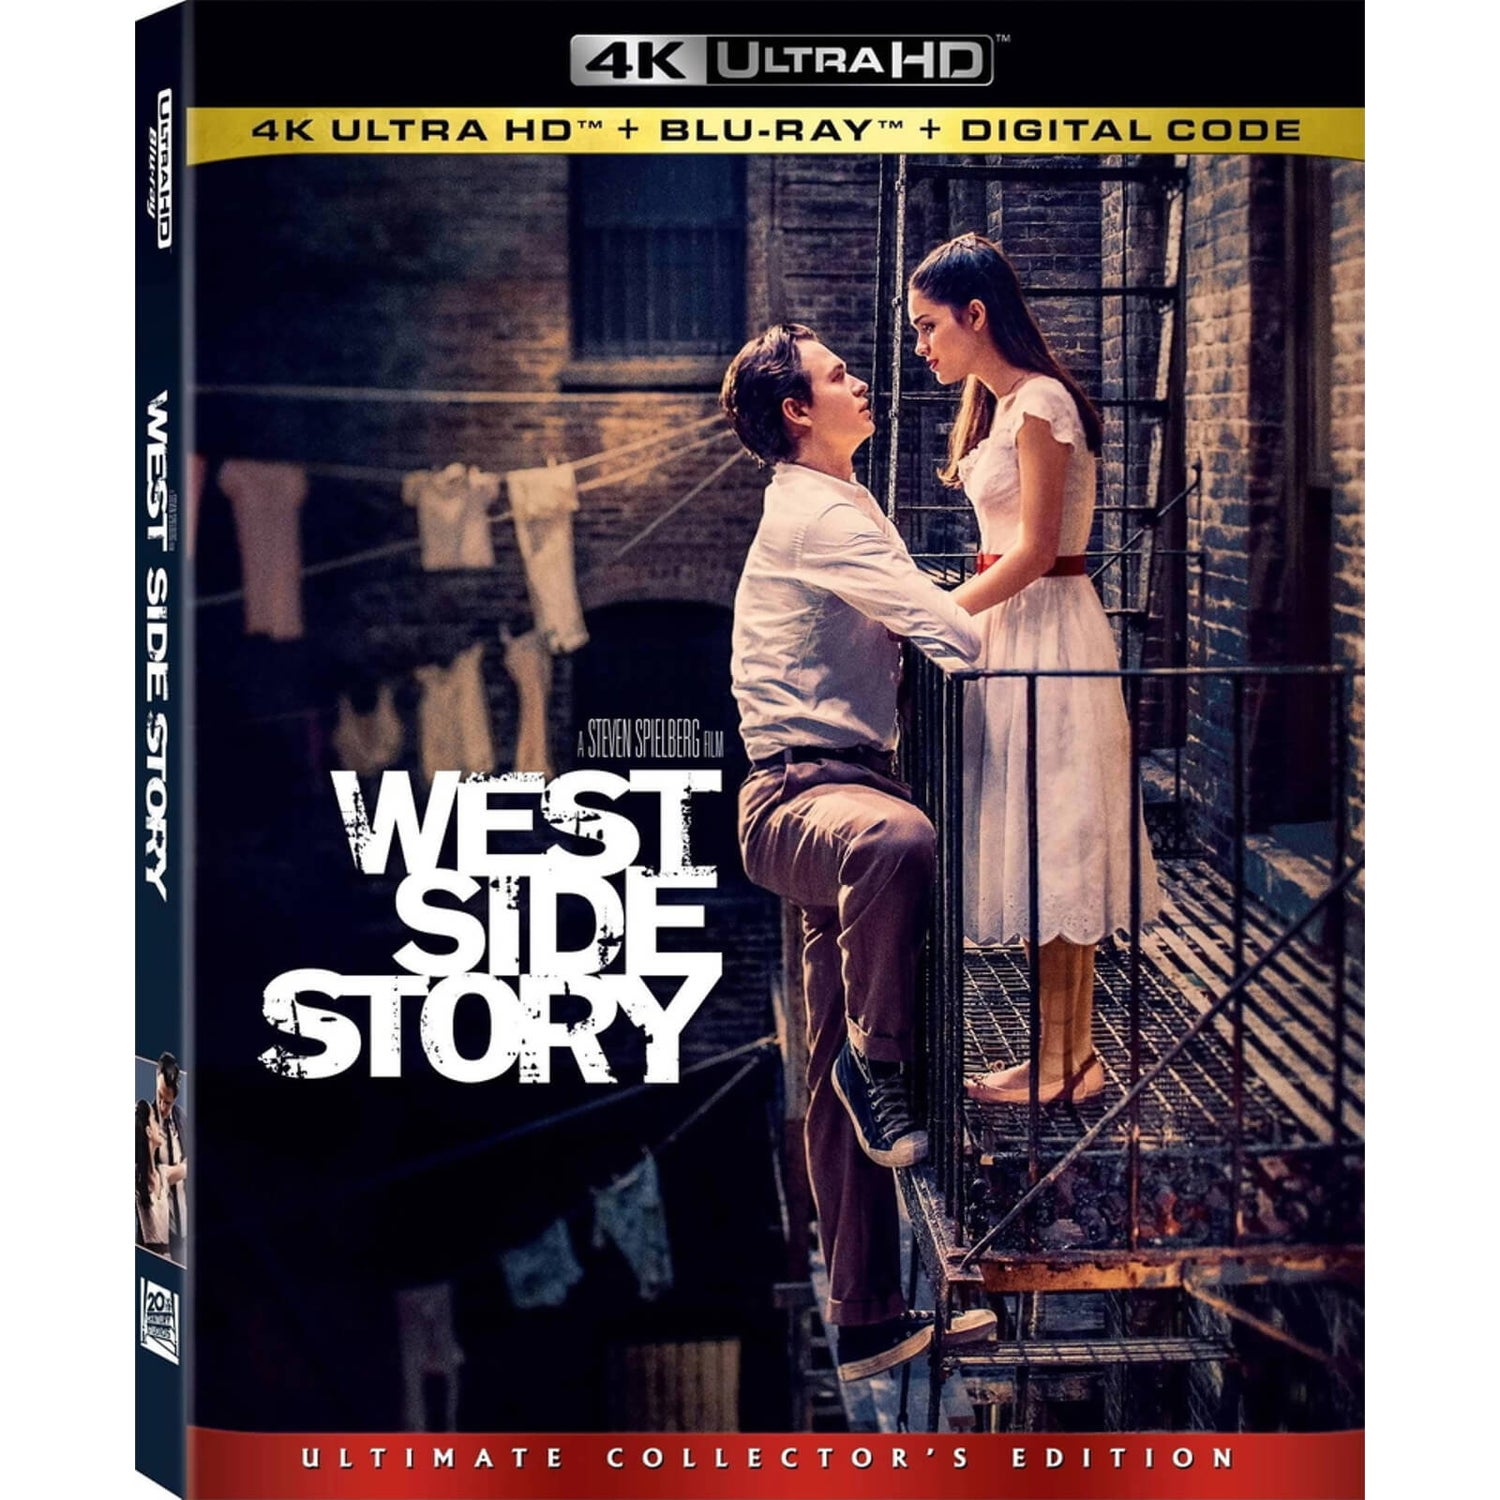 West Side Story: Ultimate Collector's Edition - 4K Ultra HD (Includes Blu-ray) (US Import)